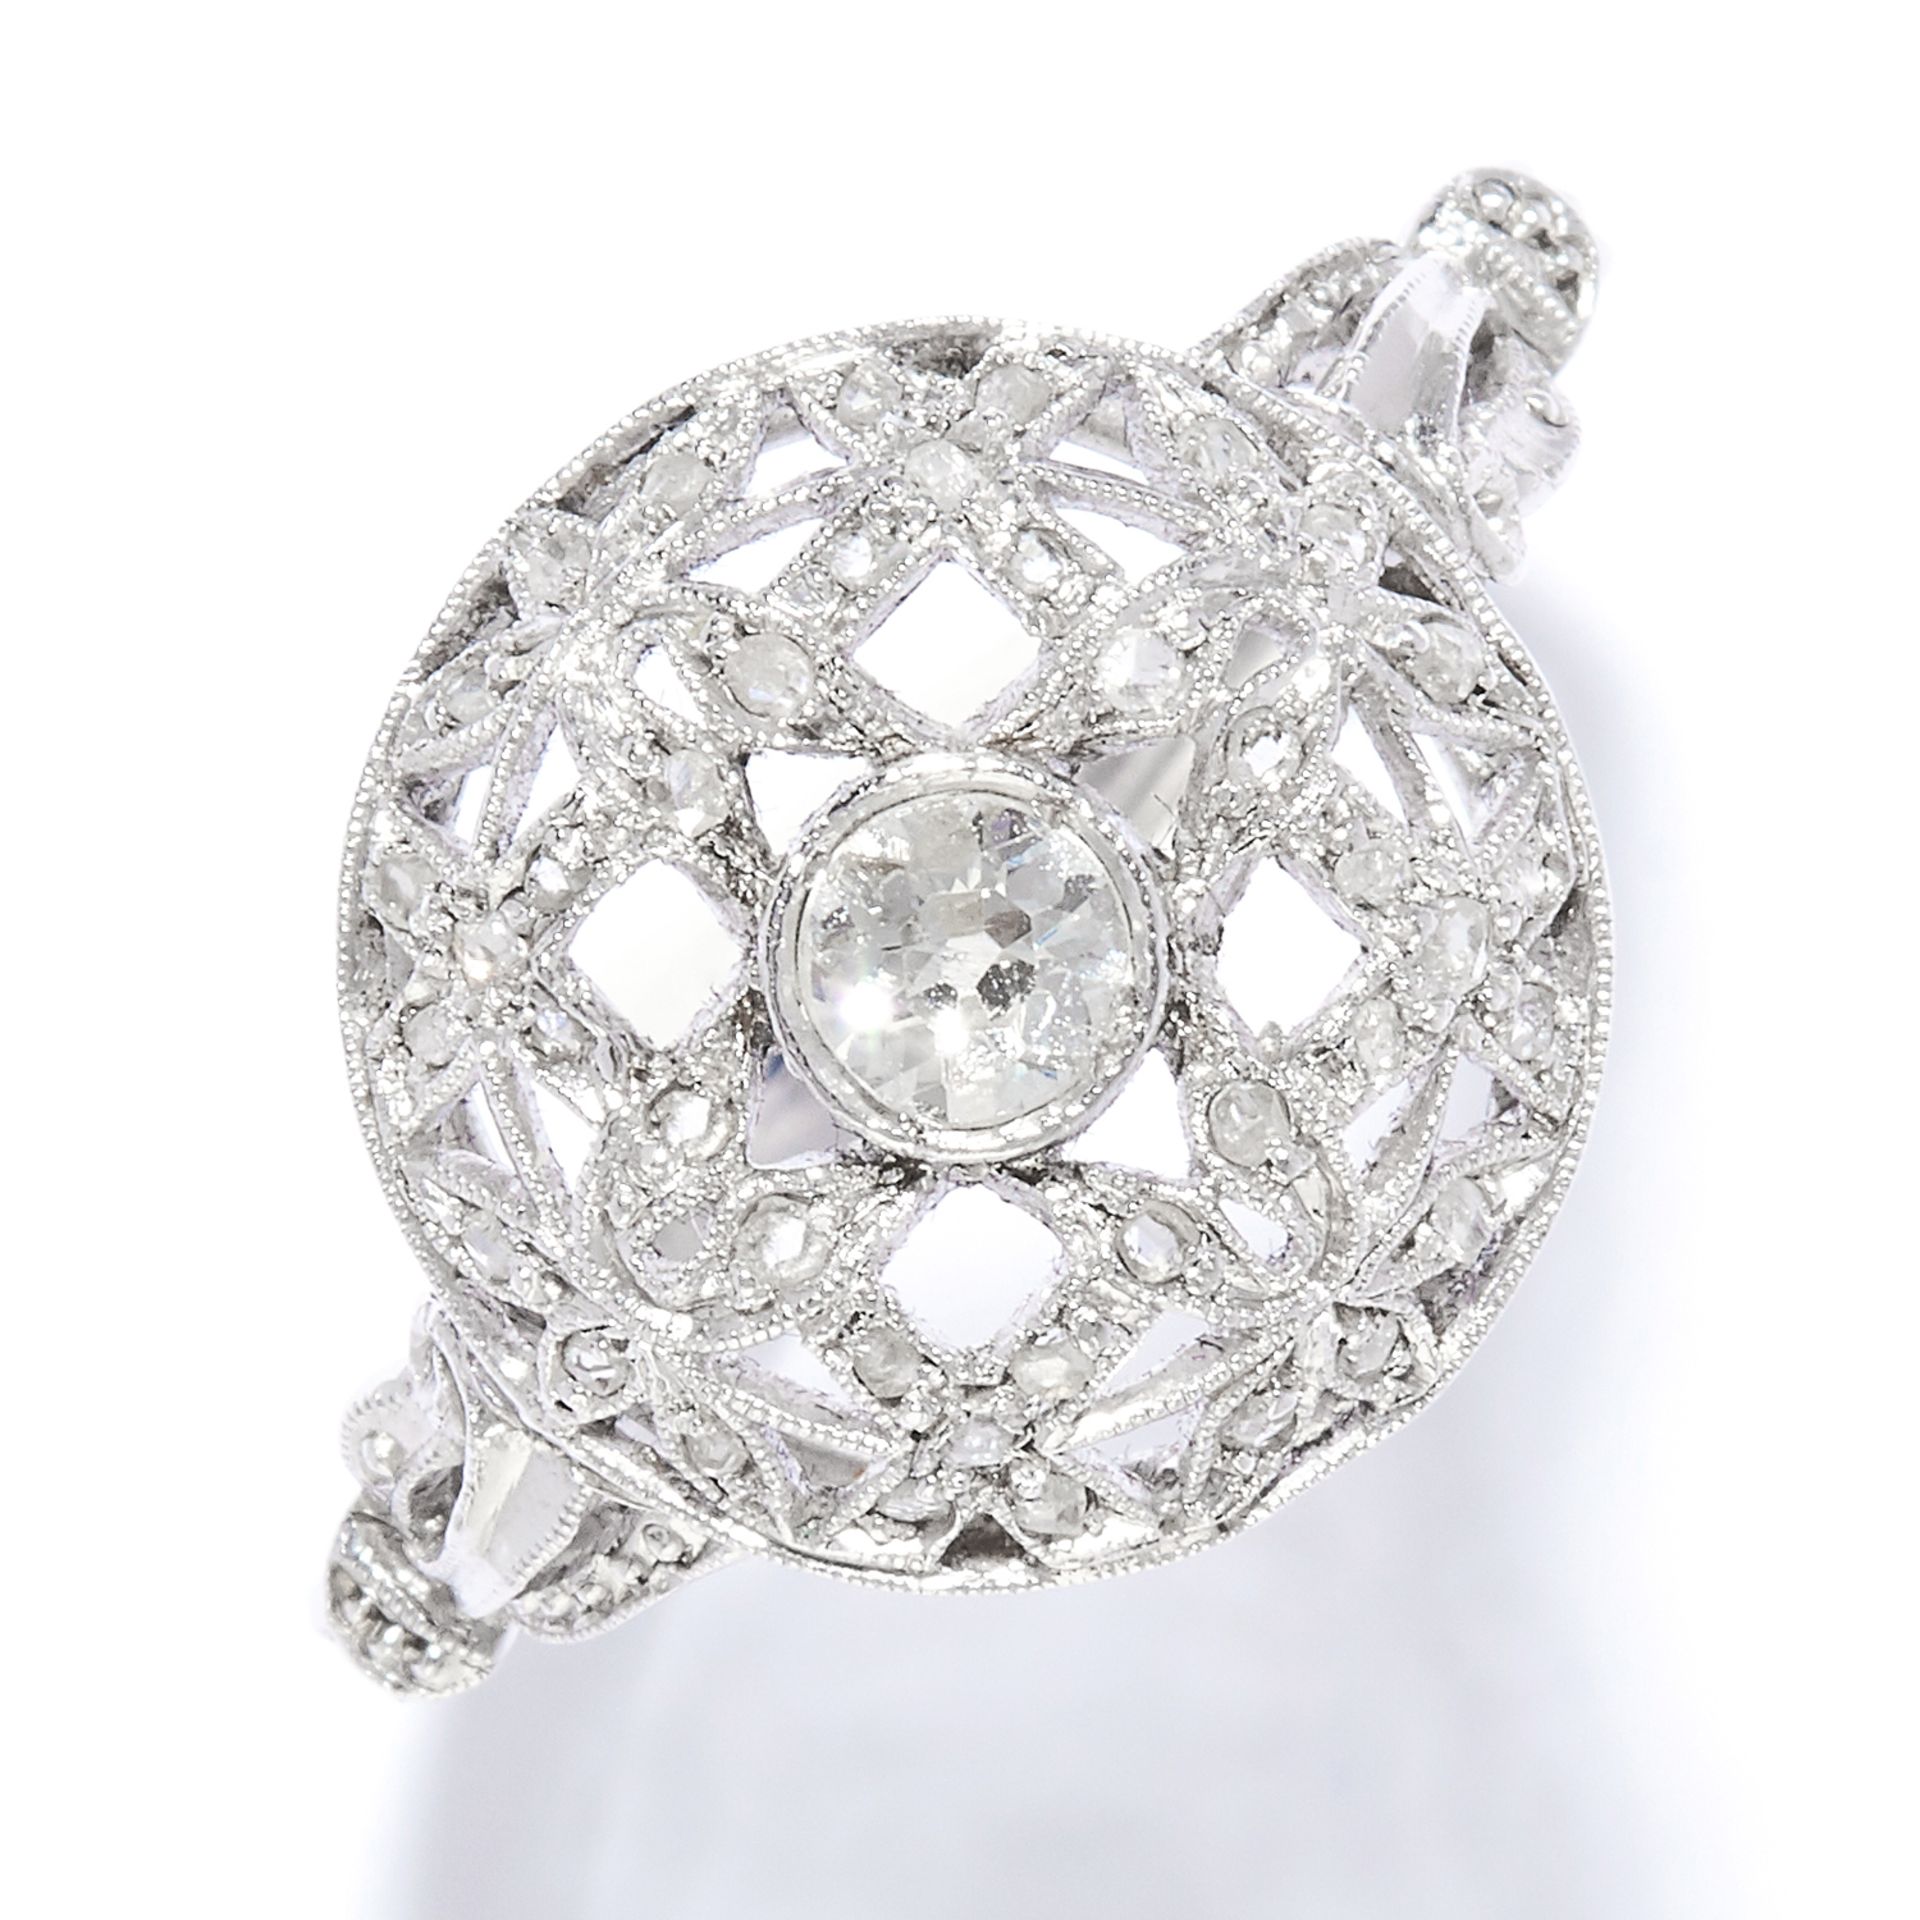 ANTIQUE DIAMOND DRESS RING in 18ct white gold, set with an old and rose cut diamonds in open